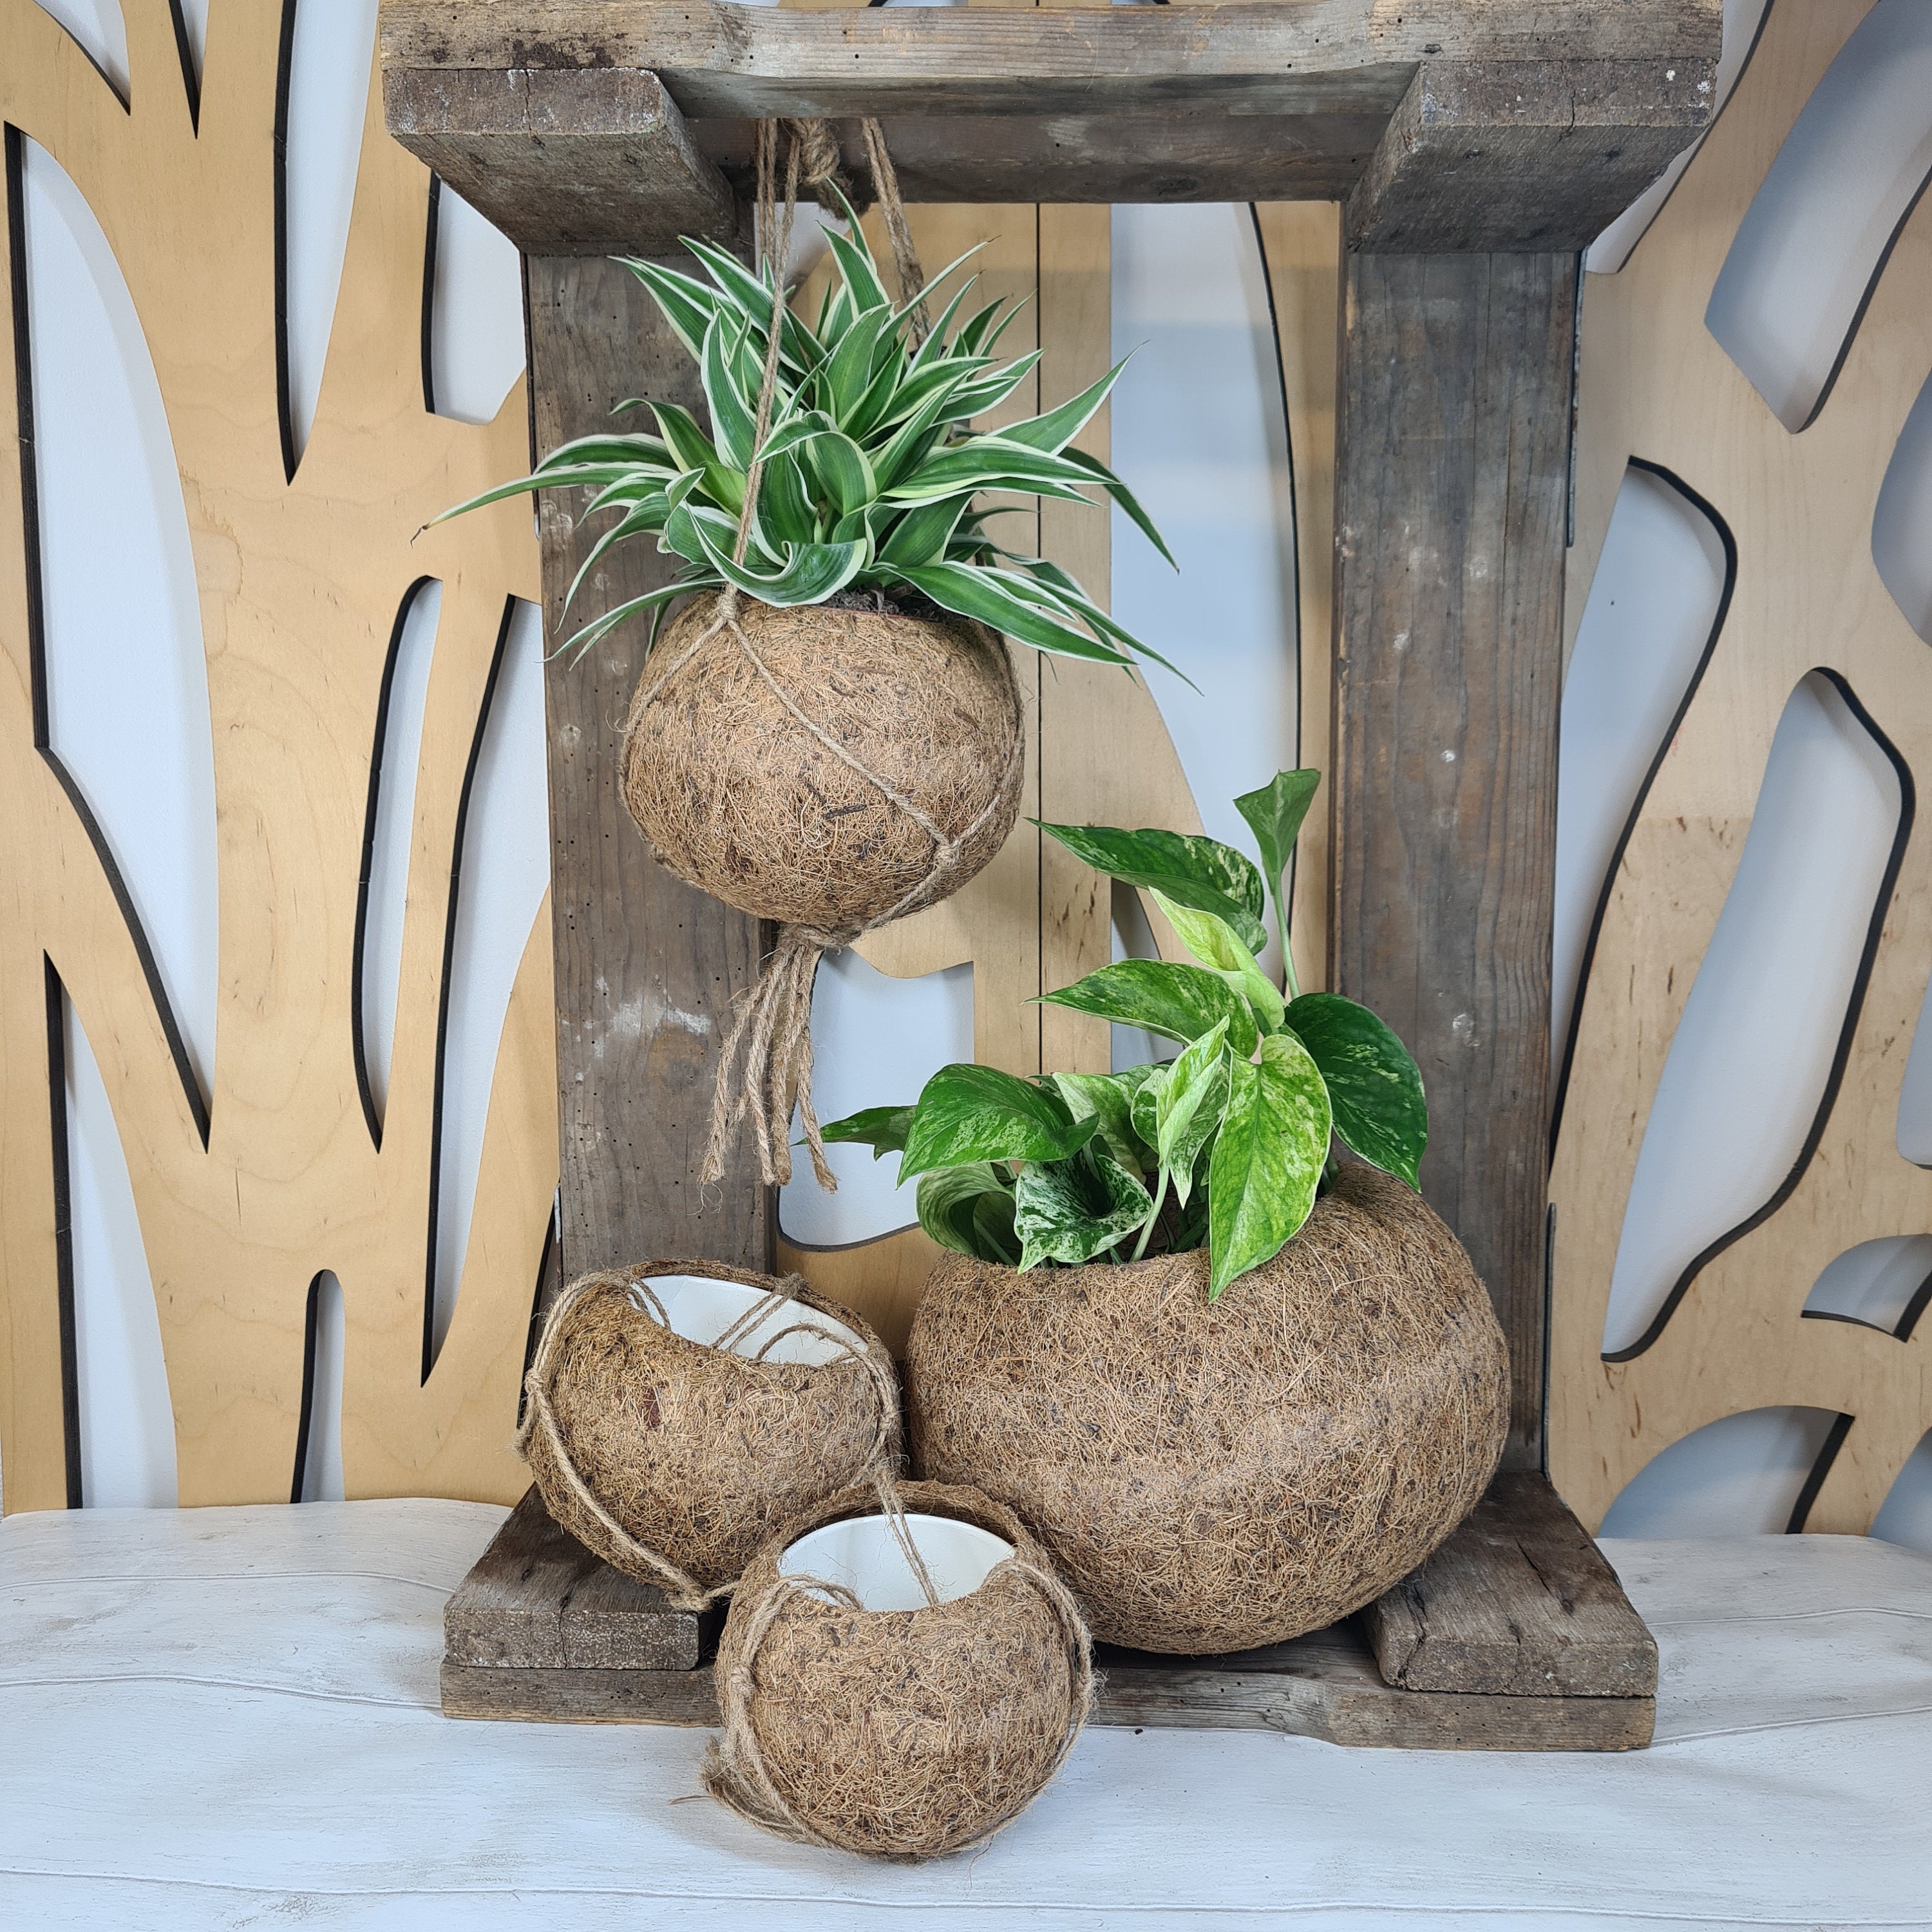 Best Planter Using Coconut Shell/Coconut Shell Planter Idea/Coconut Shell  Pot Making/ORGANIC GARDEN 